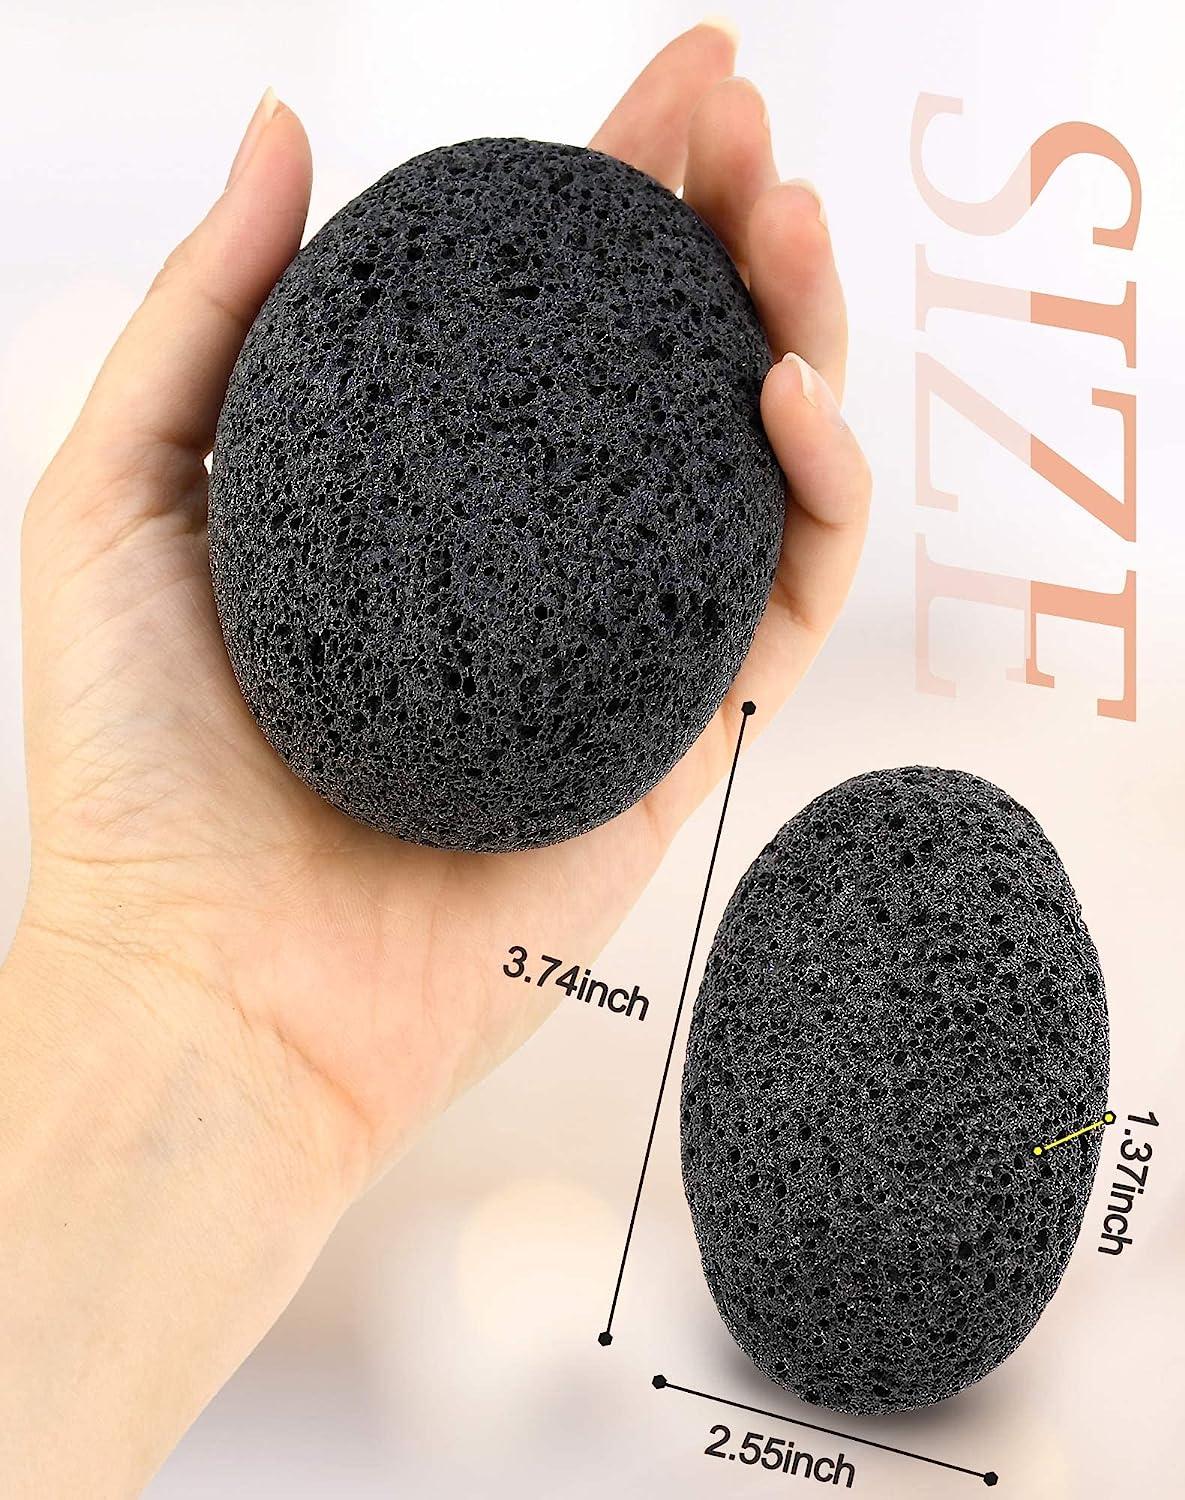 1pcs,Pumice Stones For Feet, Hands And Body - Hard Callus Remover,  Exfoliator And Scrubber To Remove Dead Skin For Home Pedicure